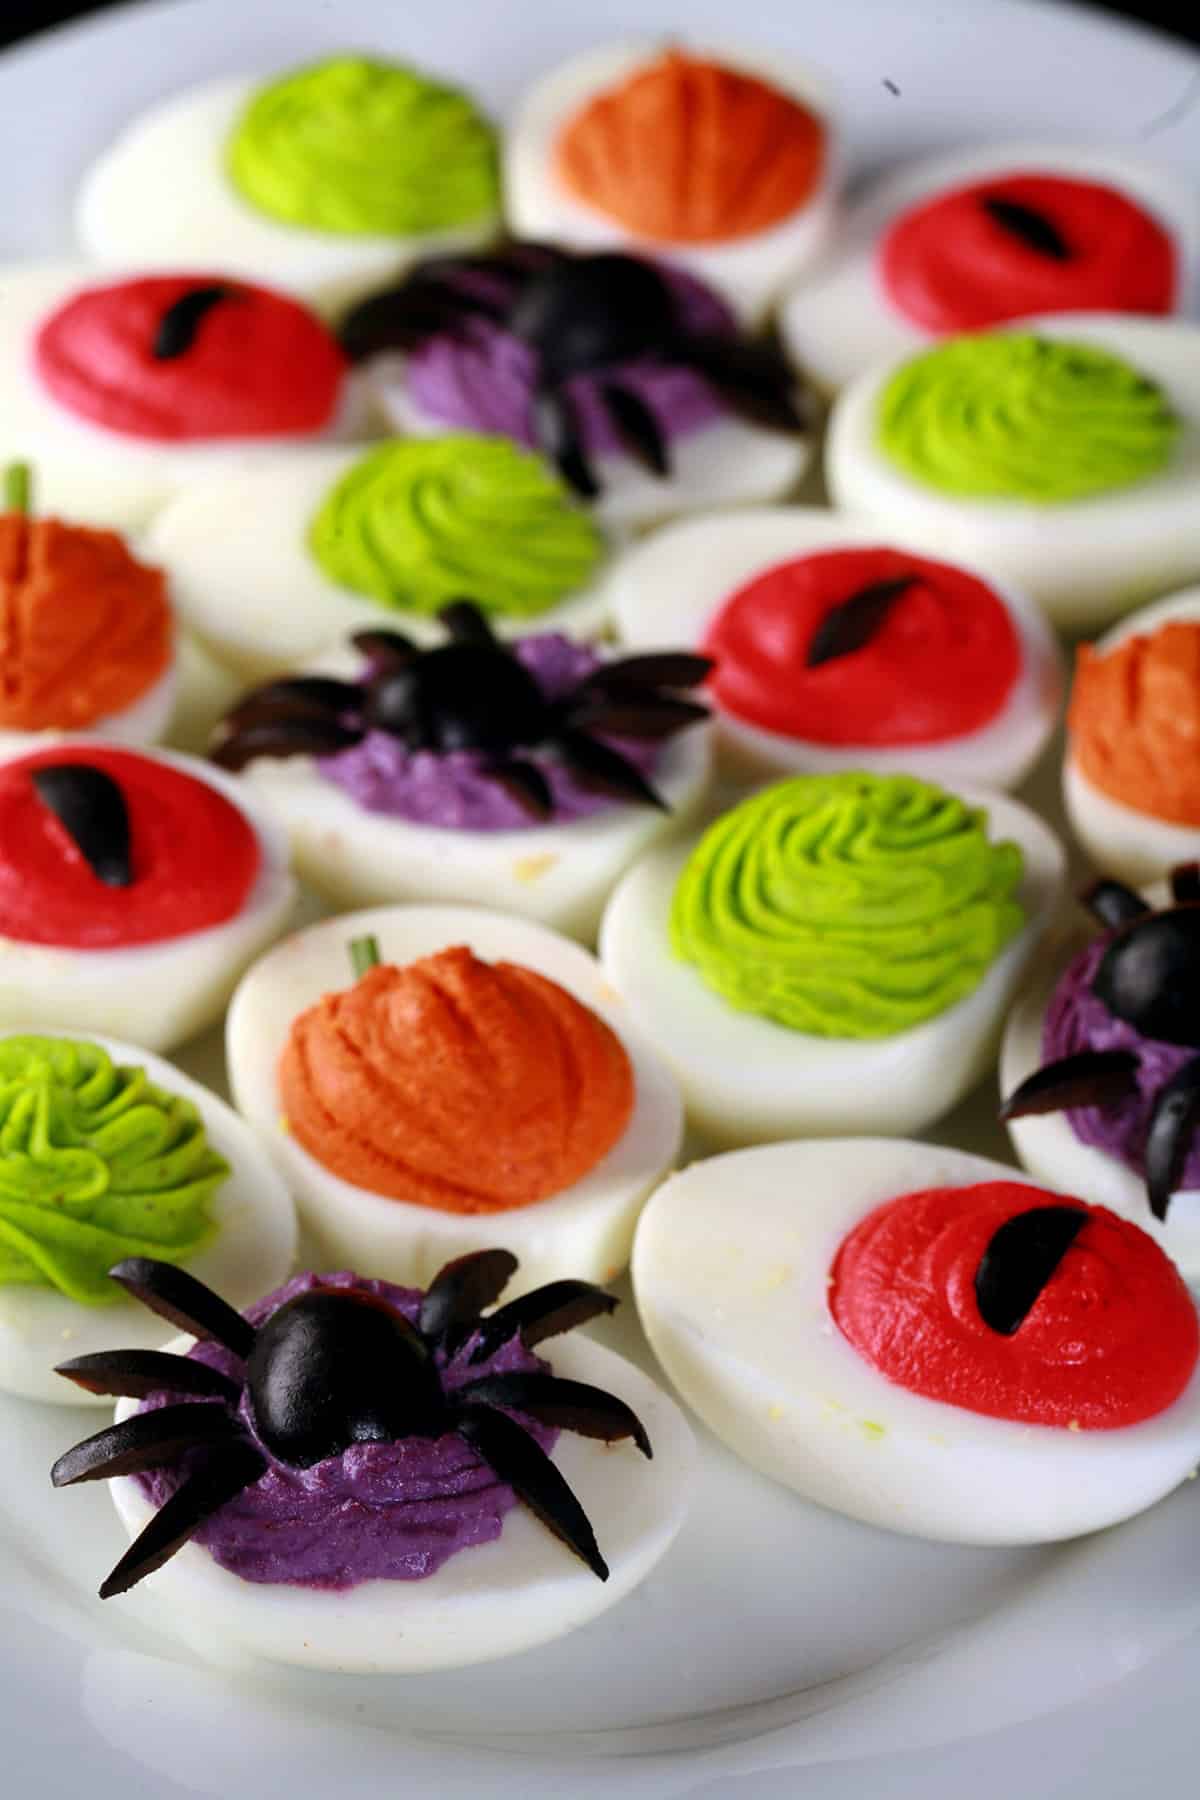 A plate of Halloween deviled eggs, with a variety of fillings and styles in red, orange, lime green, and purple.